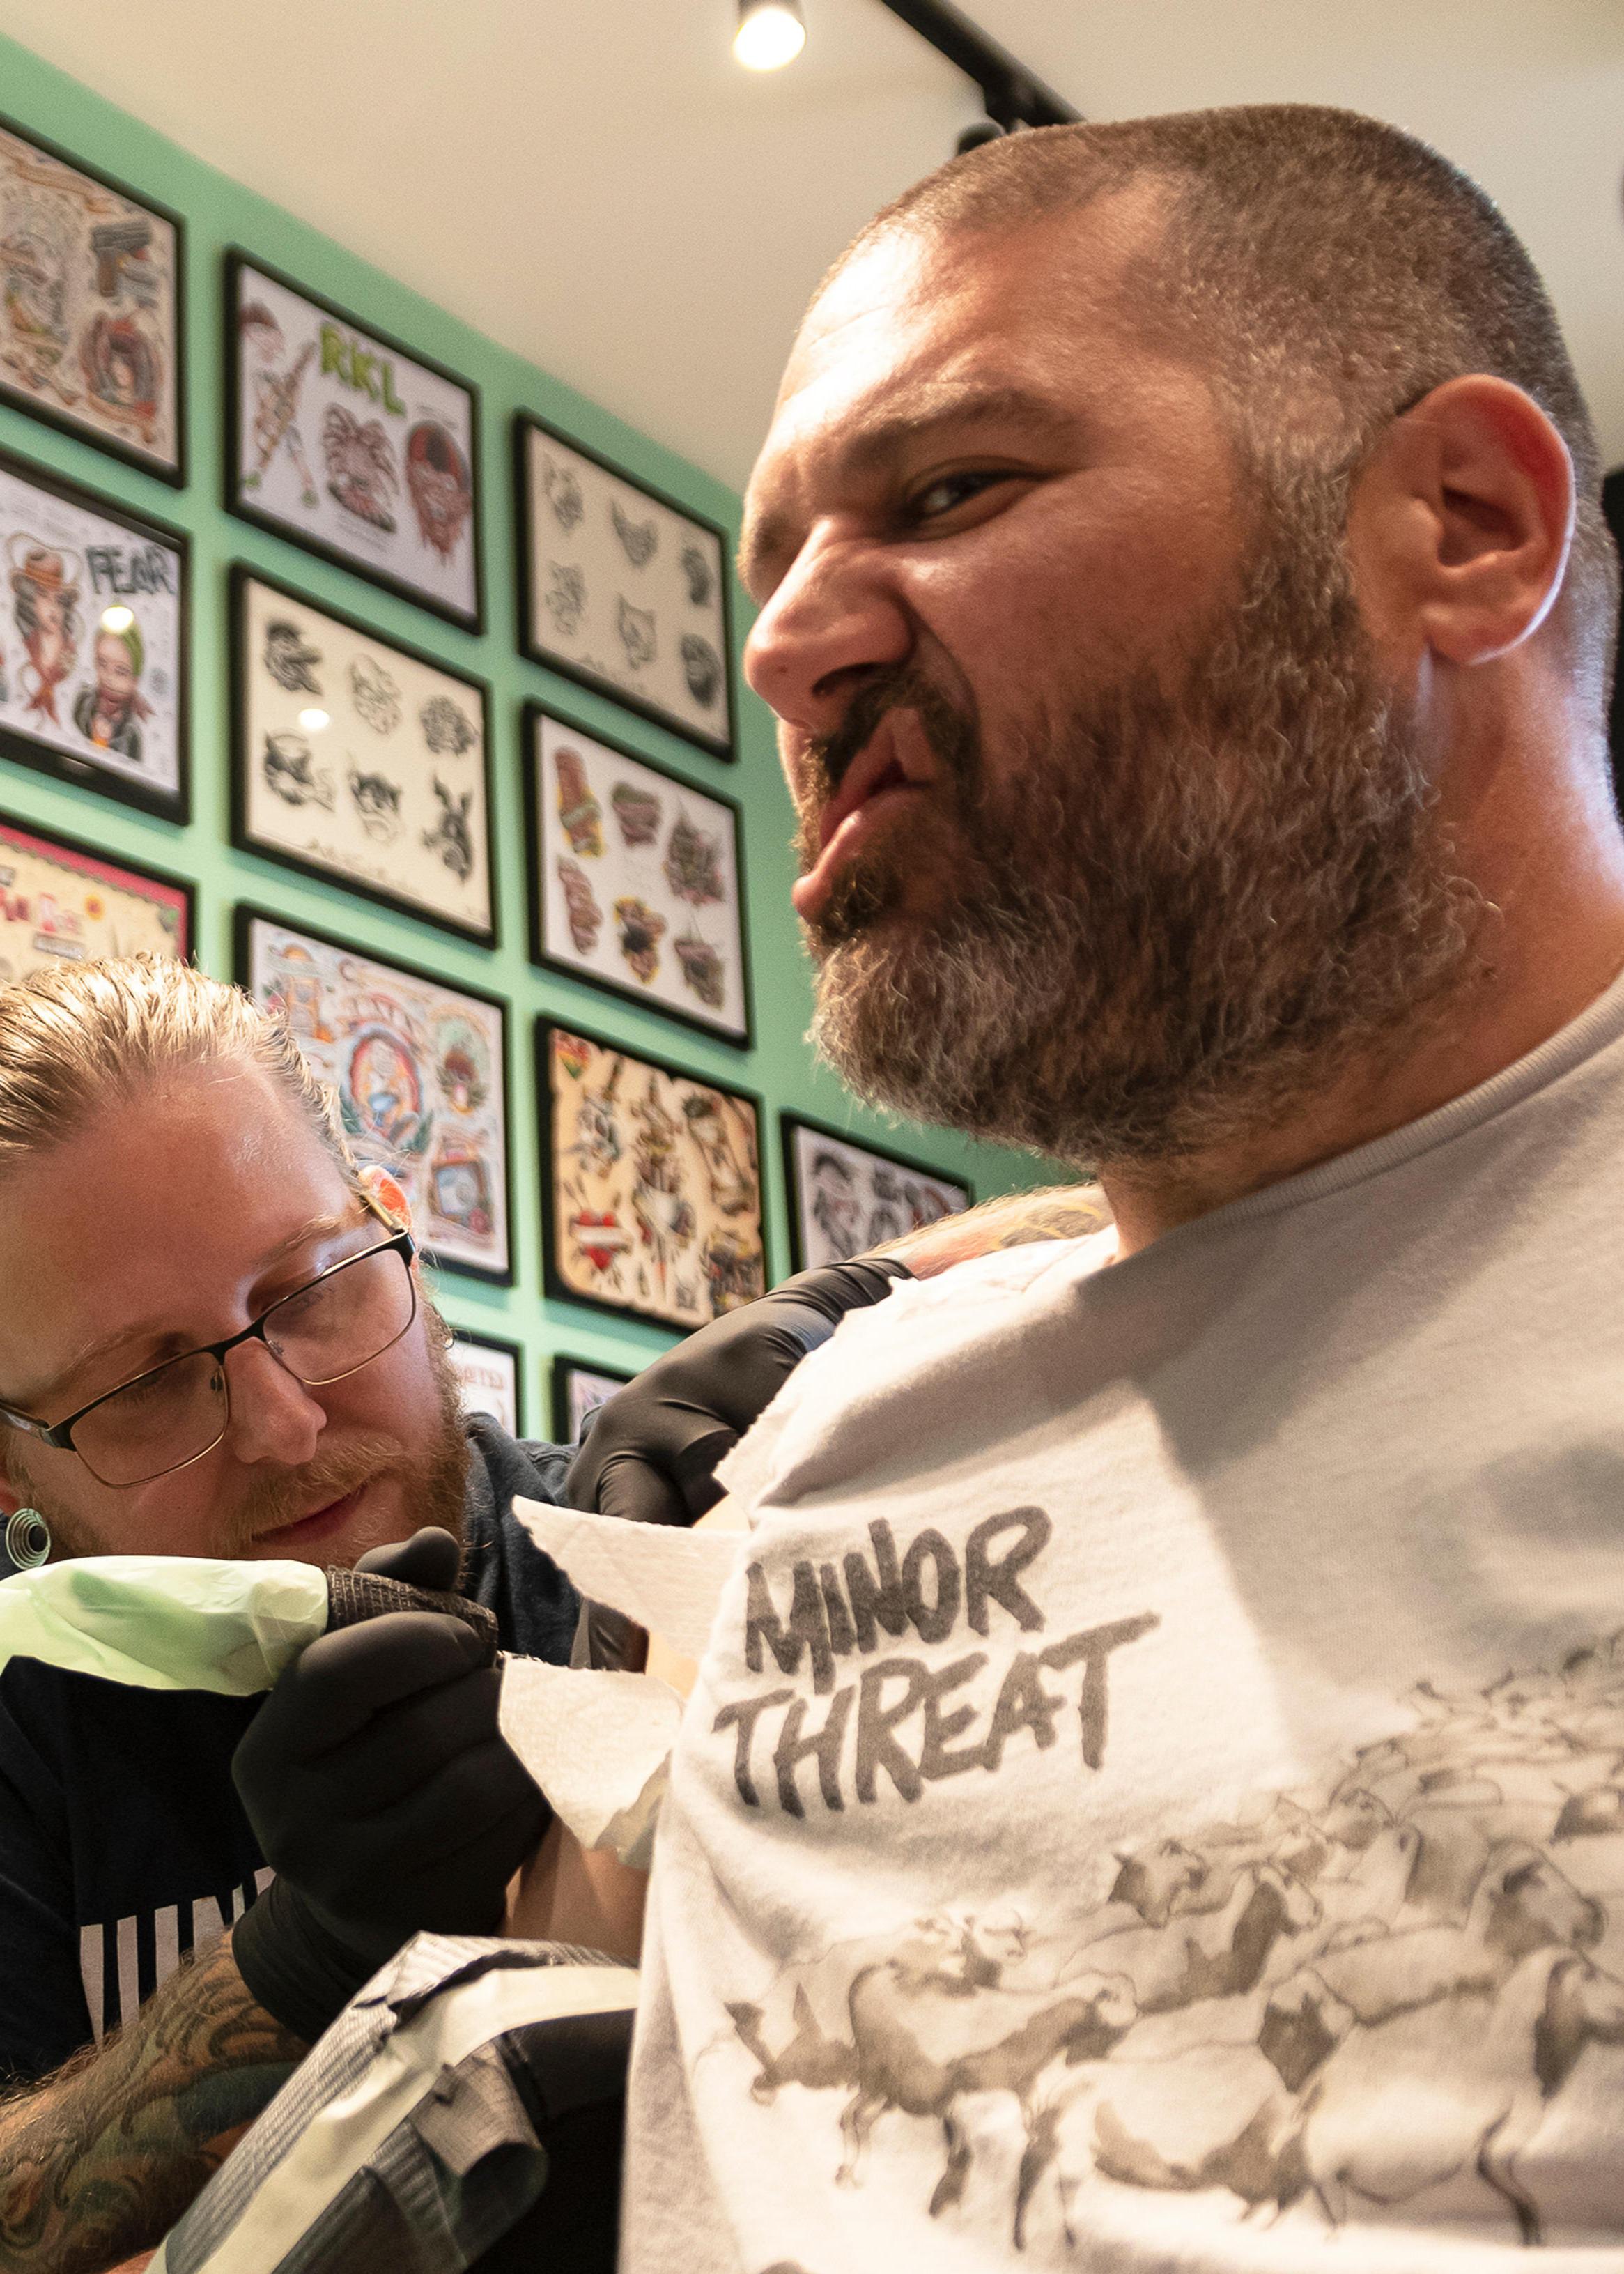 The Shop is truly unique as it’s the only tattoo parlor of it's kind operating in a museum and it’s contribution to making the museum a tactile, hands on experience cannot be denied.